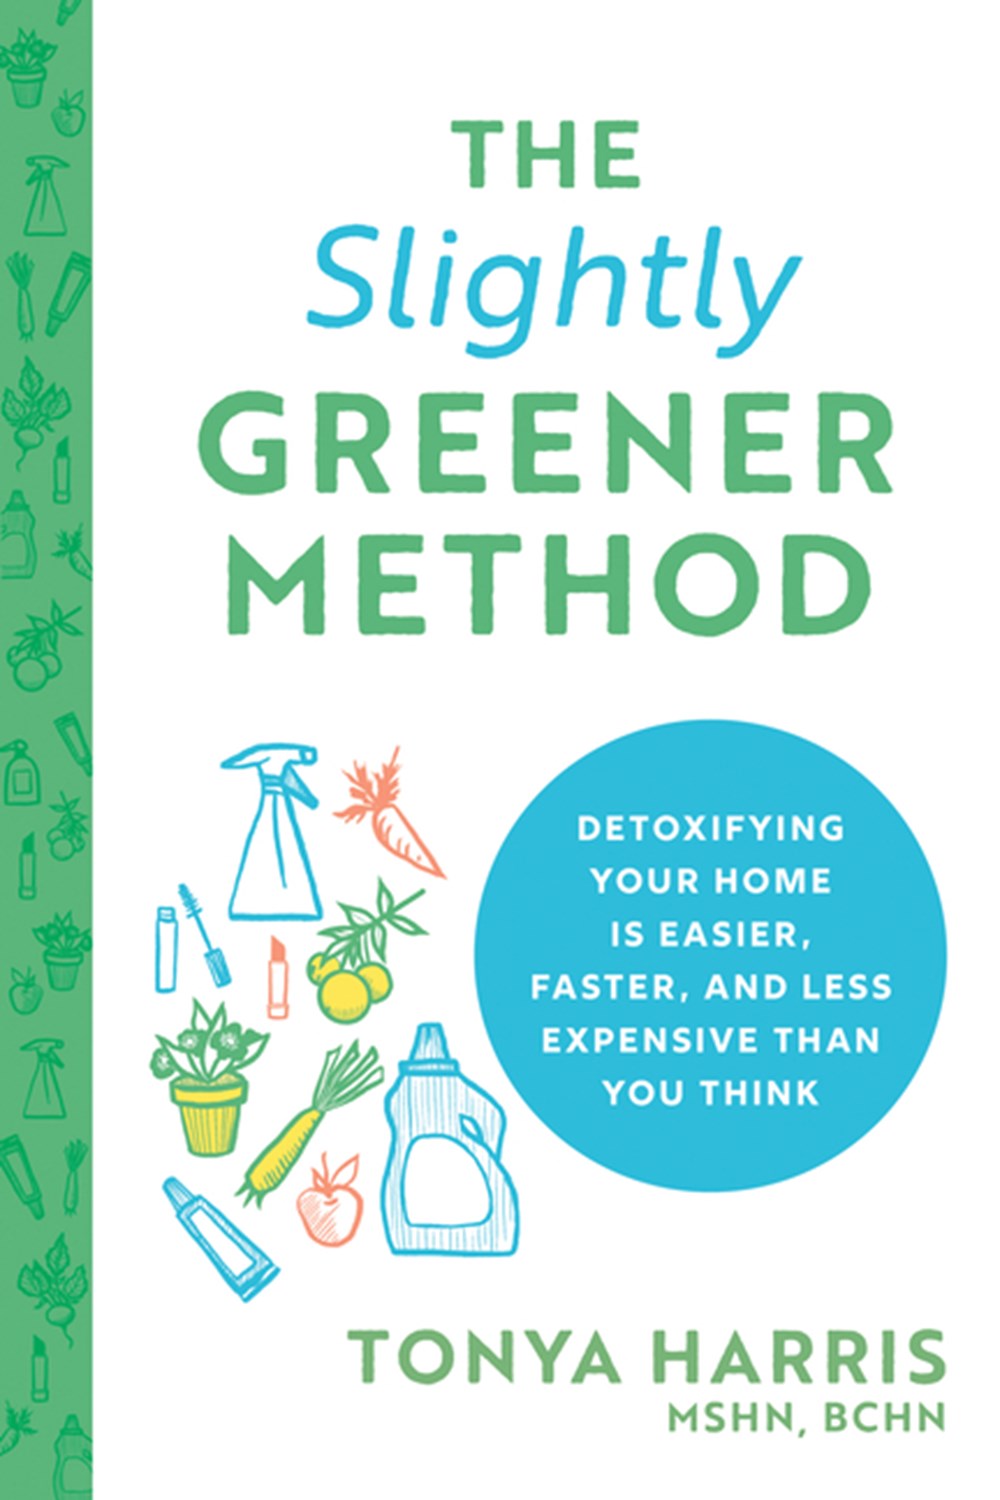 Slightly Greener Method Detoxifying Your Home Is Easier, Faster, and Less Expensive Than You Think